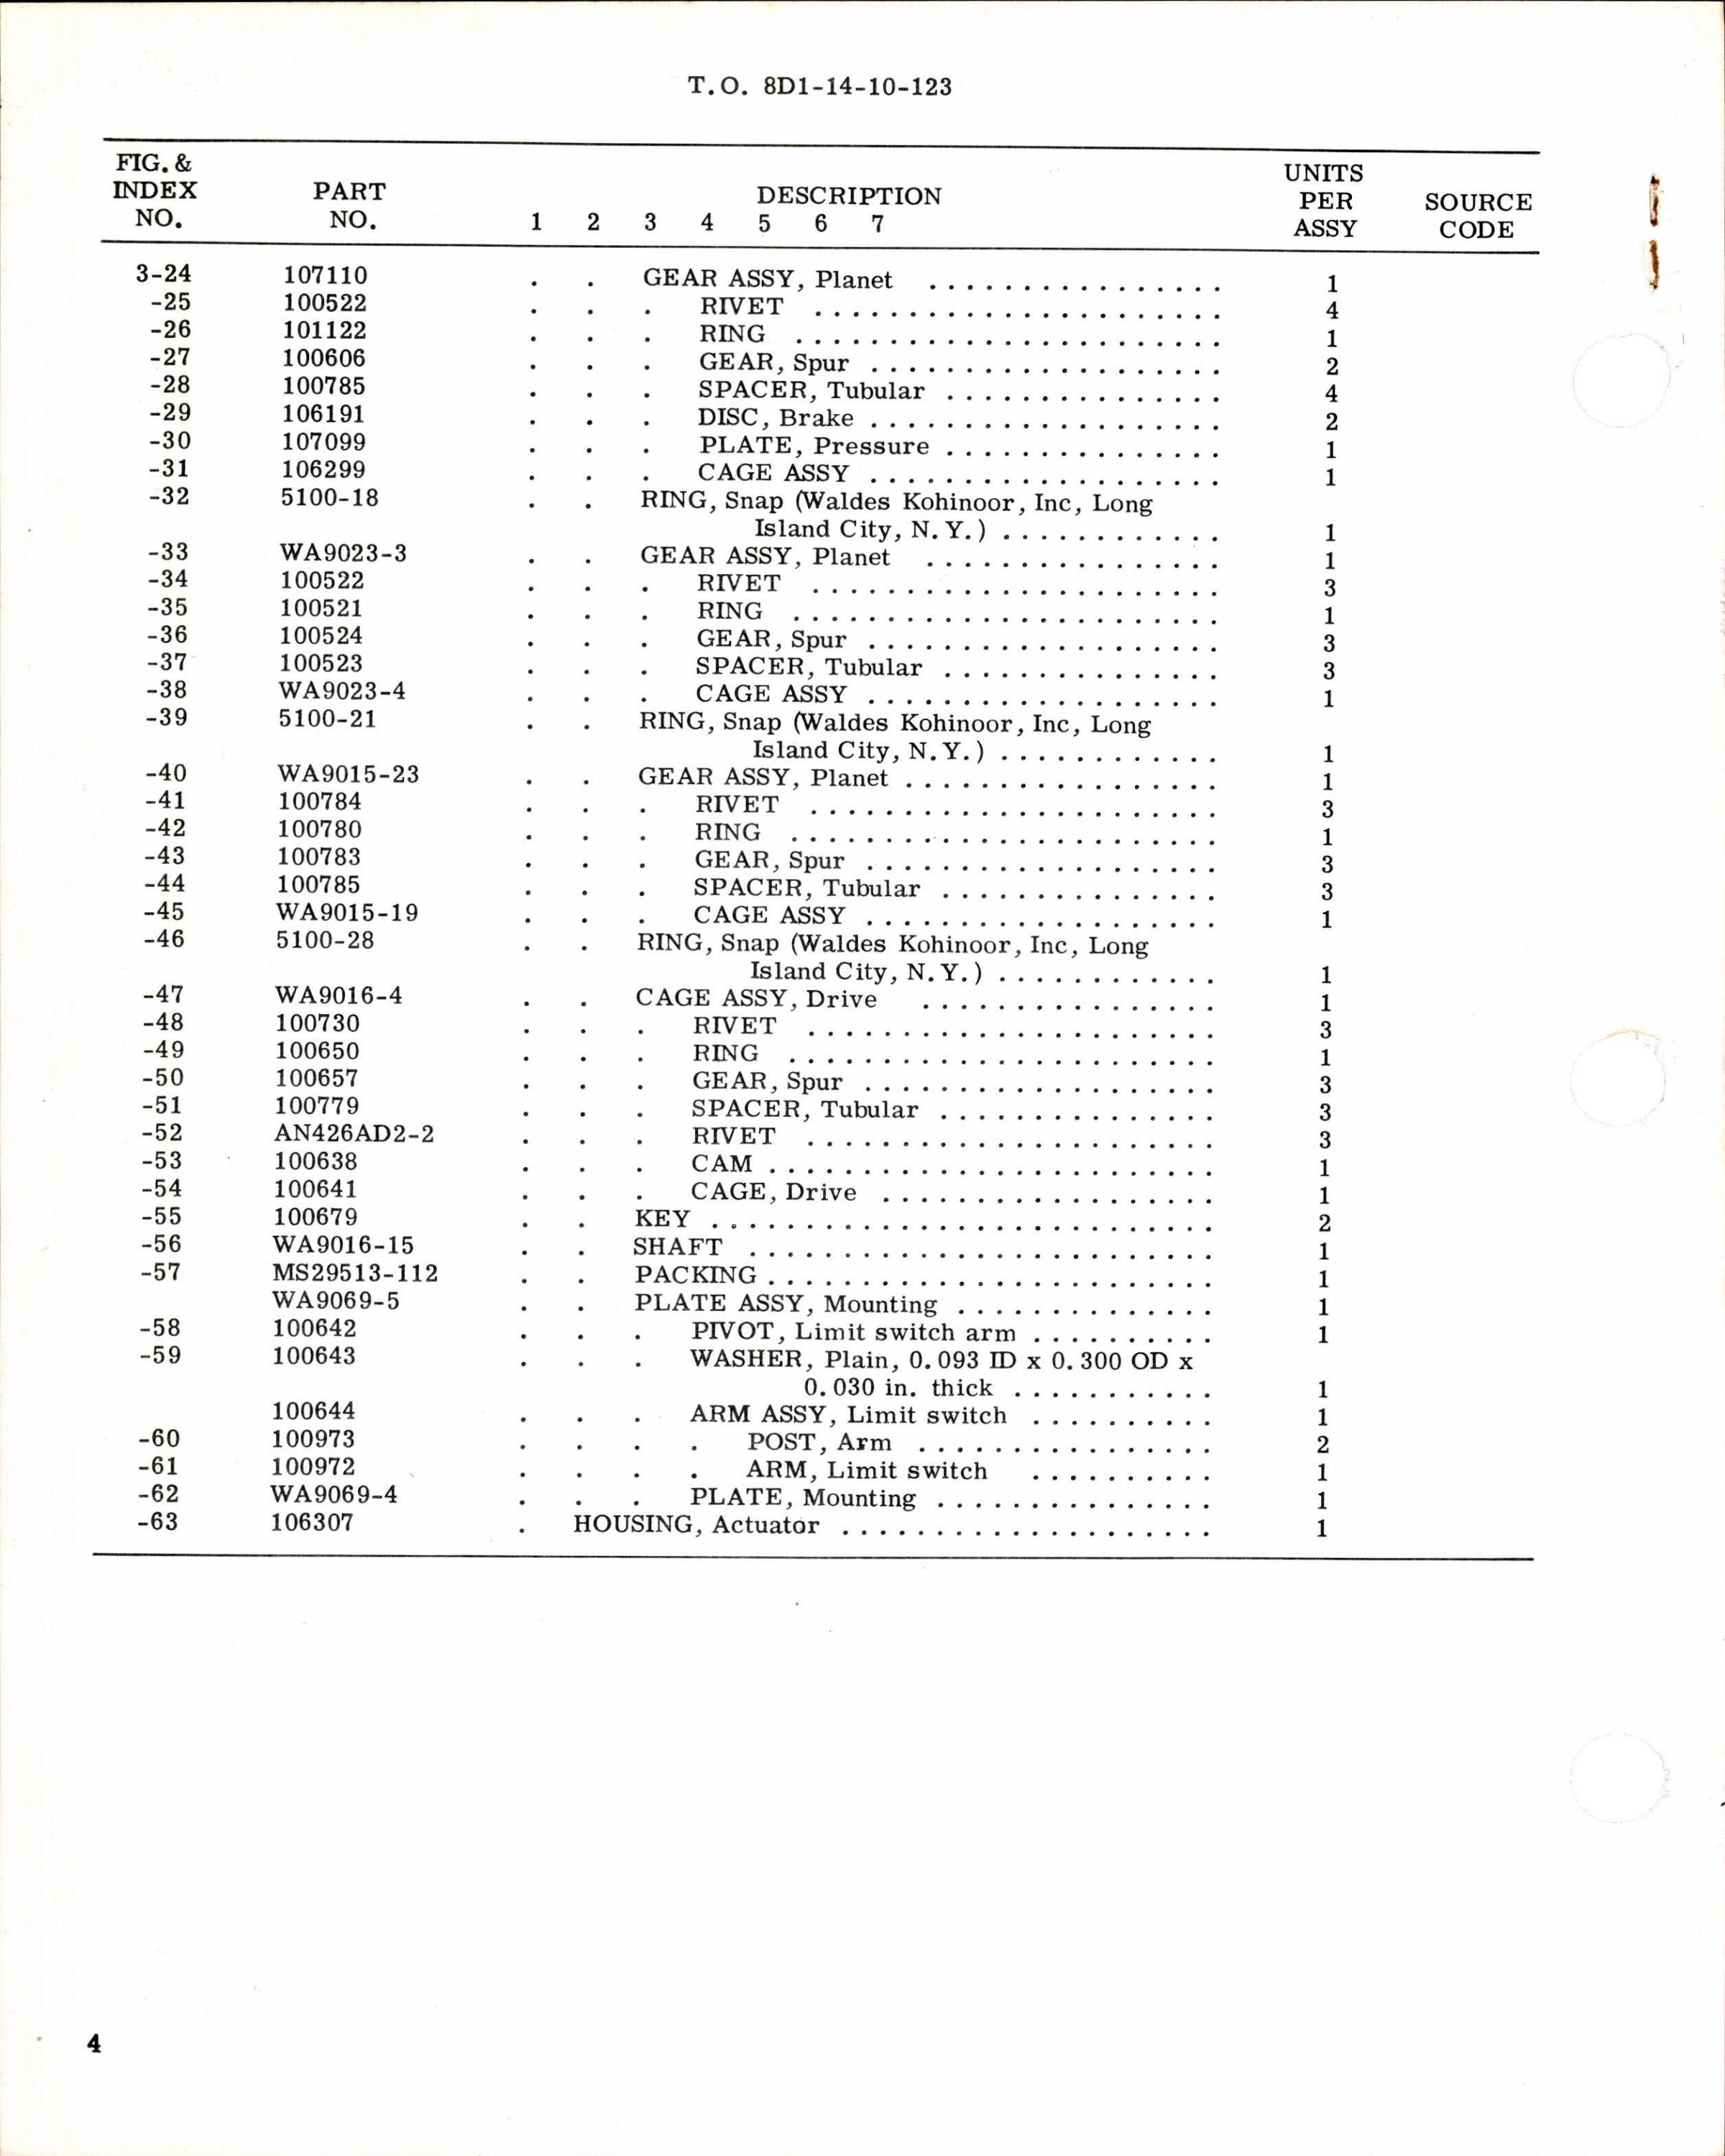 Sample page 4 from AirCorps Library document: Instructions w Parts Breakdown for Actuator Assembly Part 106510